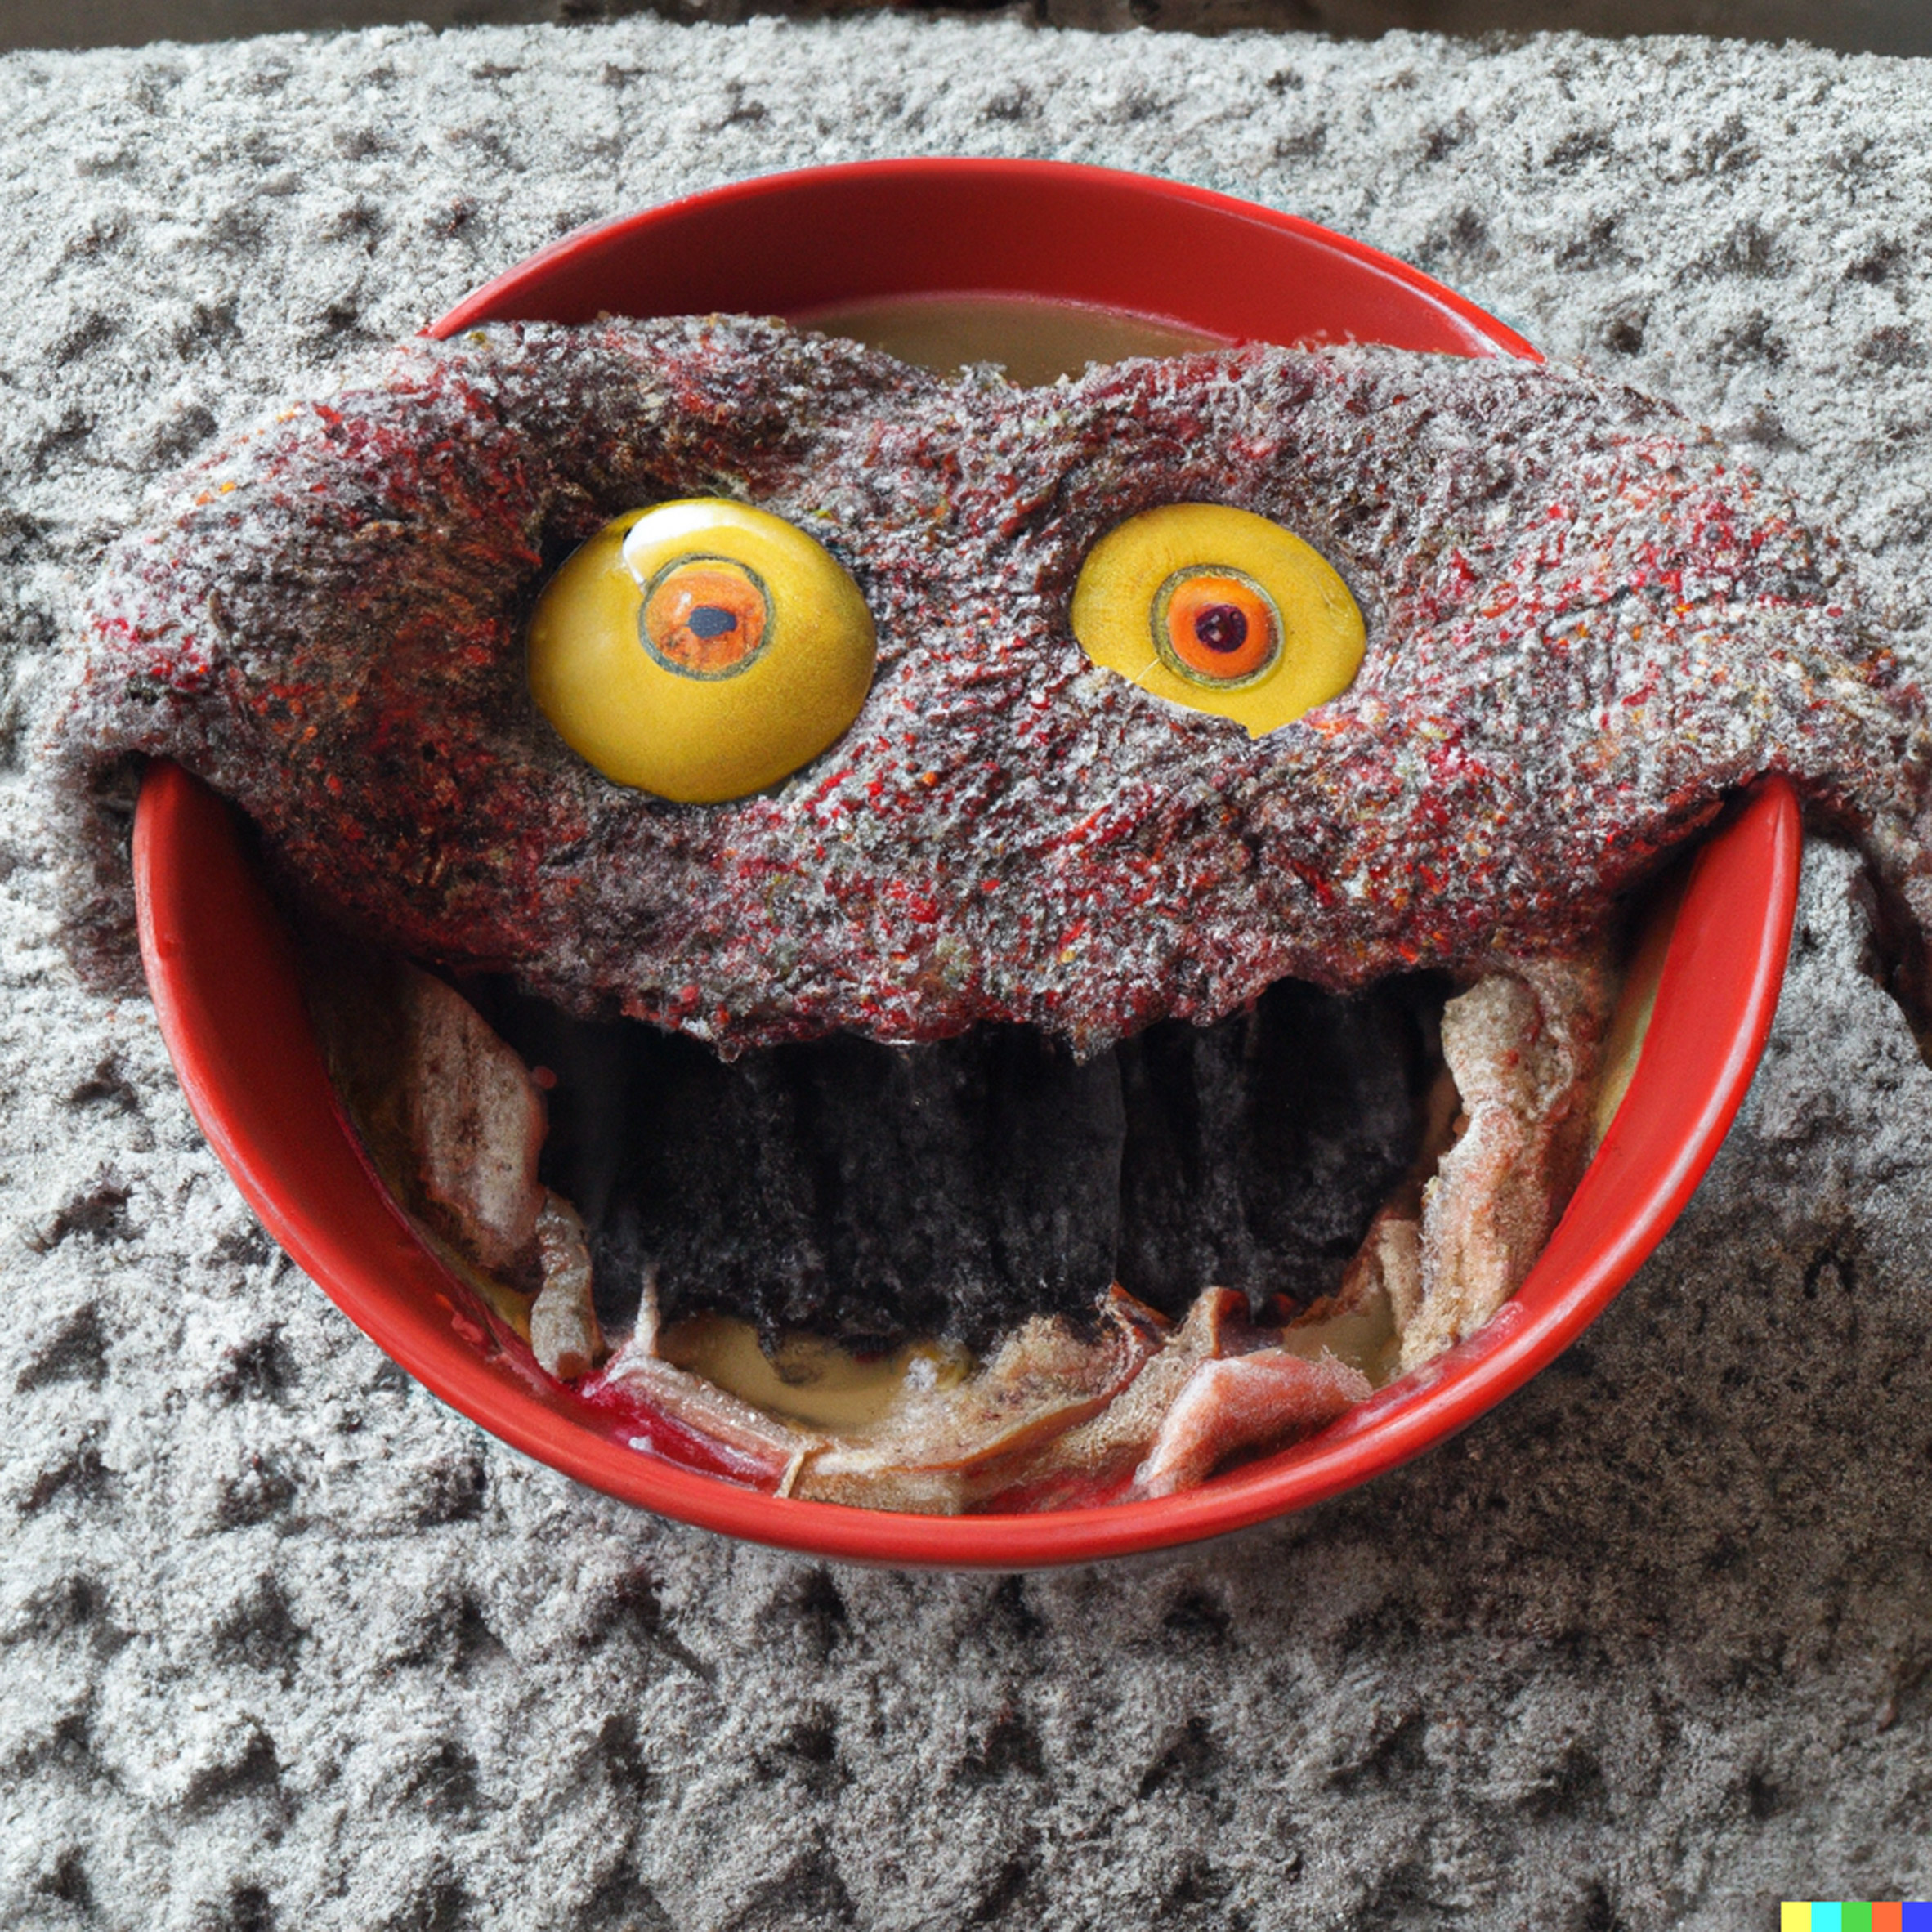 DALL·E 2 image of a bowl of soup that looks like a monster, knitted out of wool